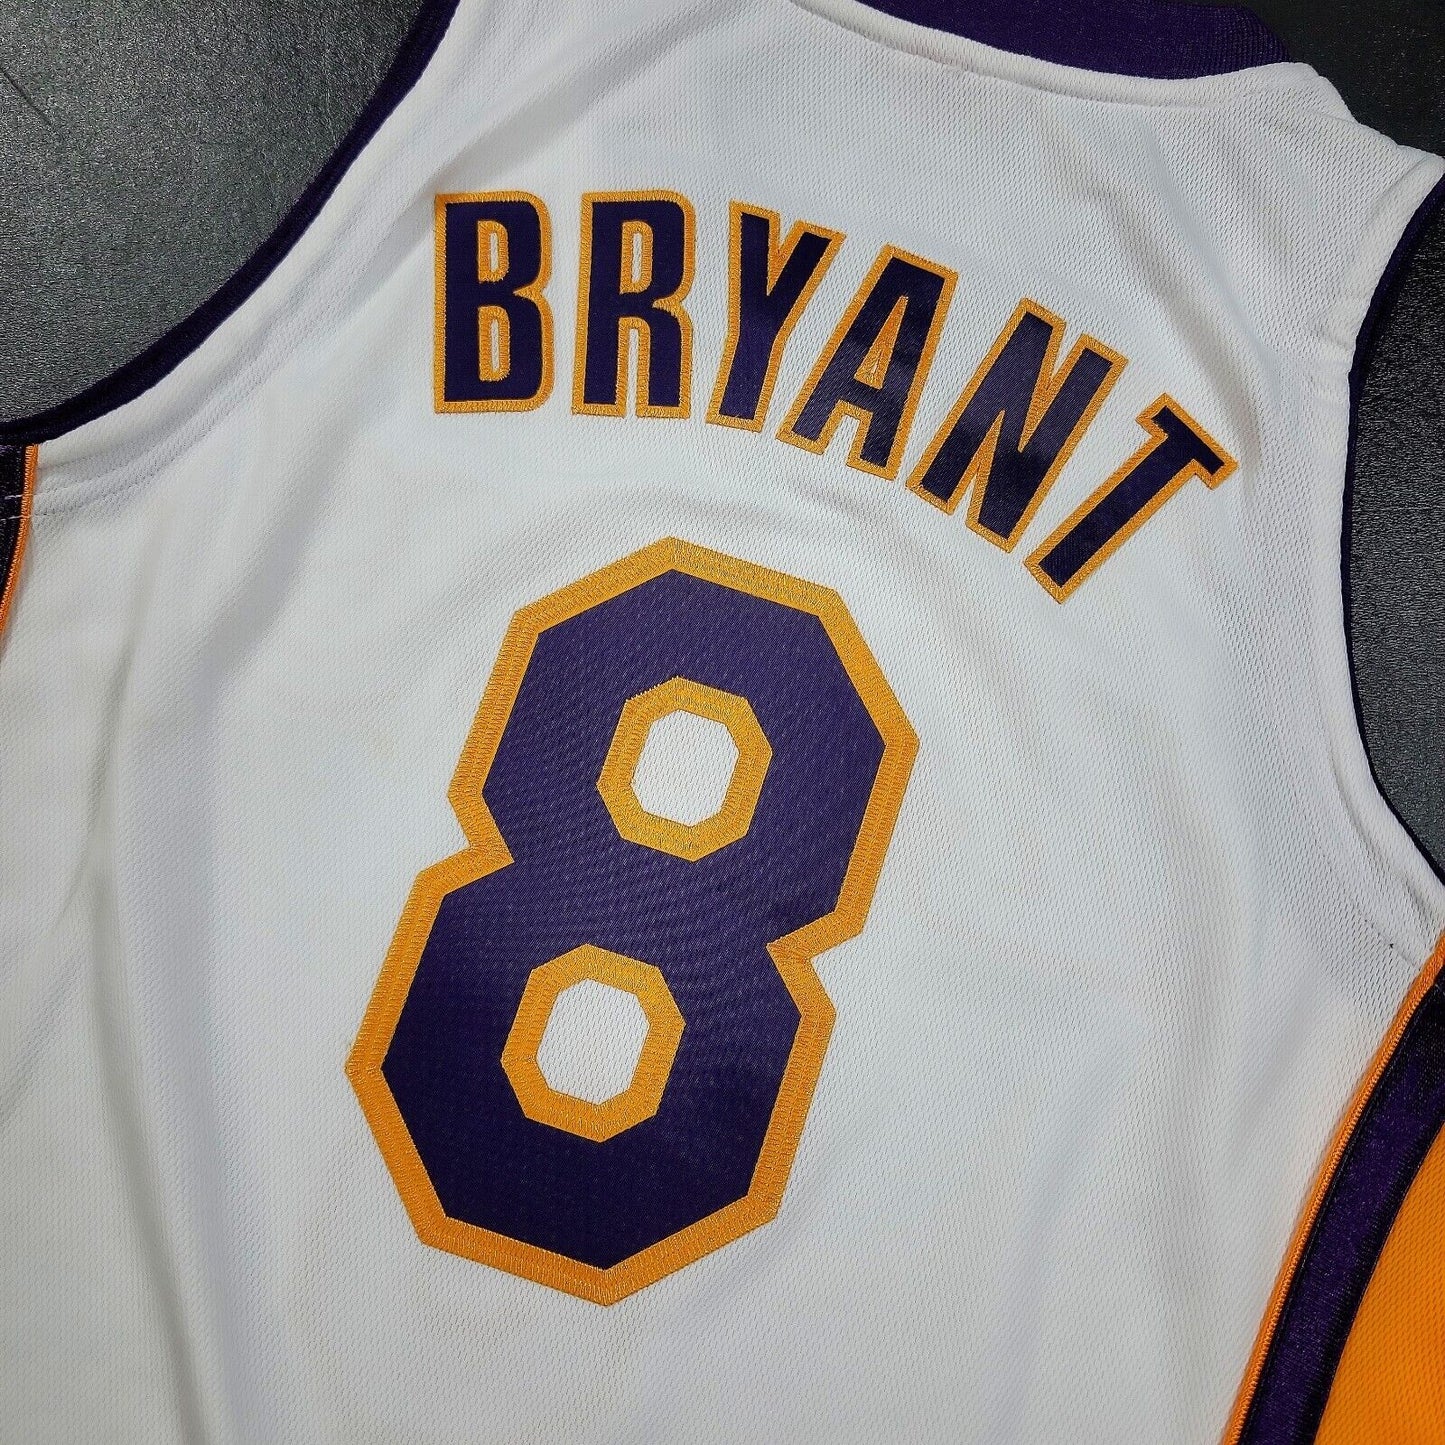 100% Authentic Kobe Bryant Mitchell & Ness 03 04 Lakers Jersey Size 40 M Mens